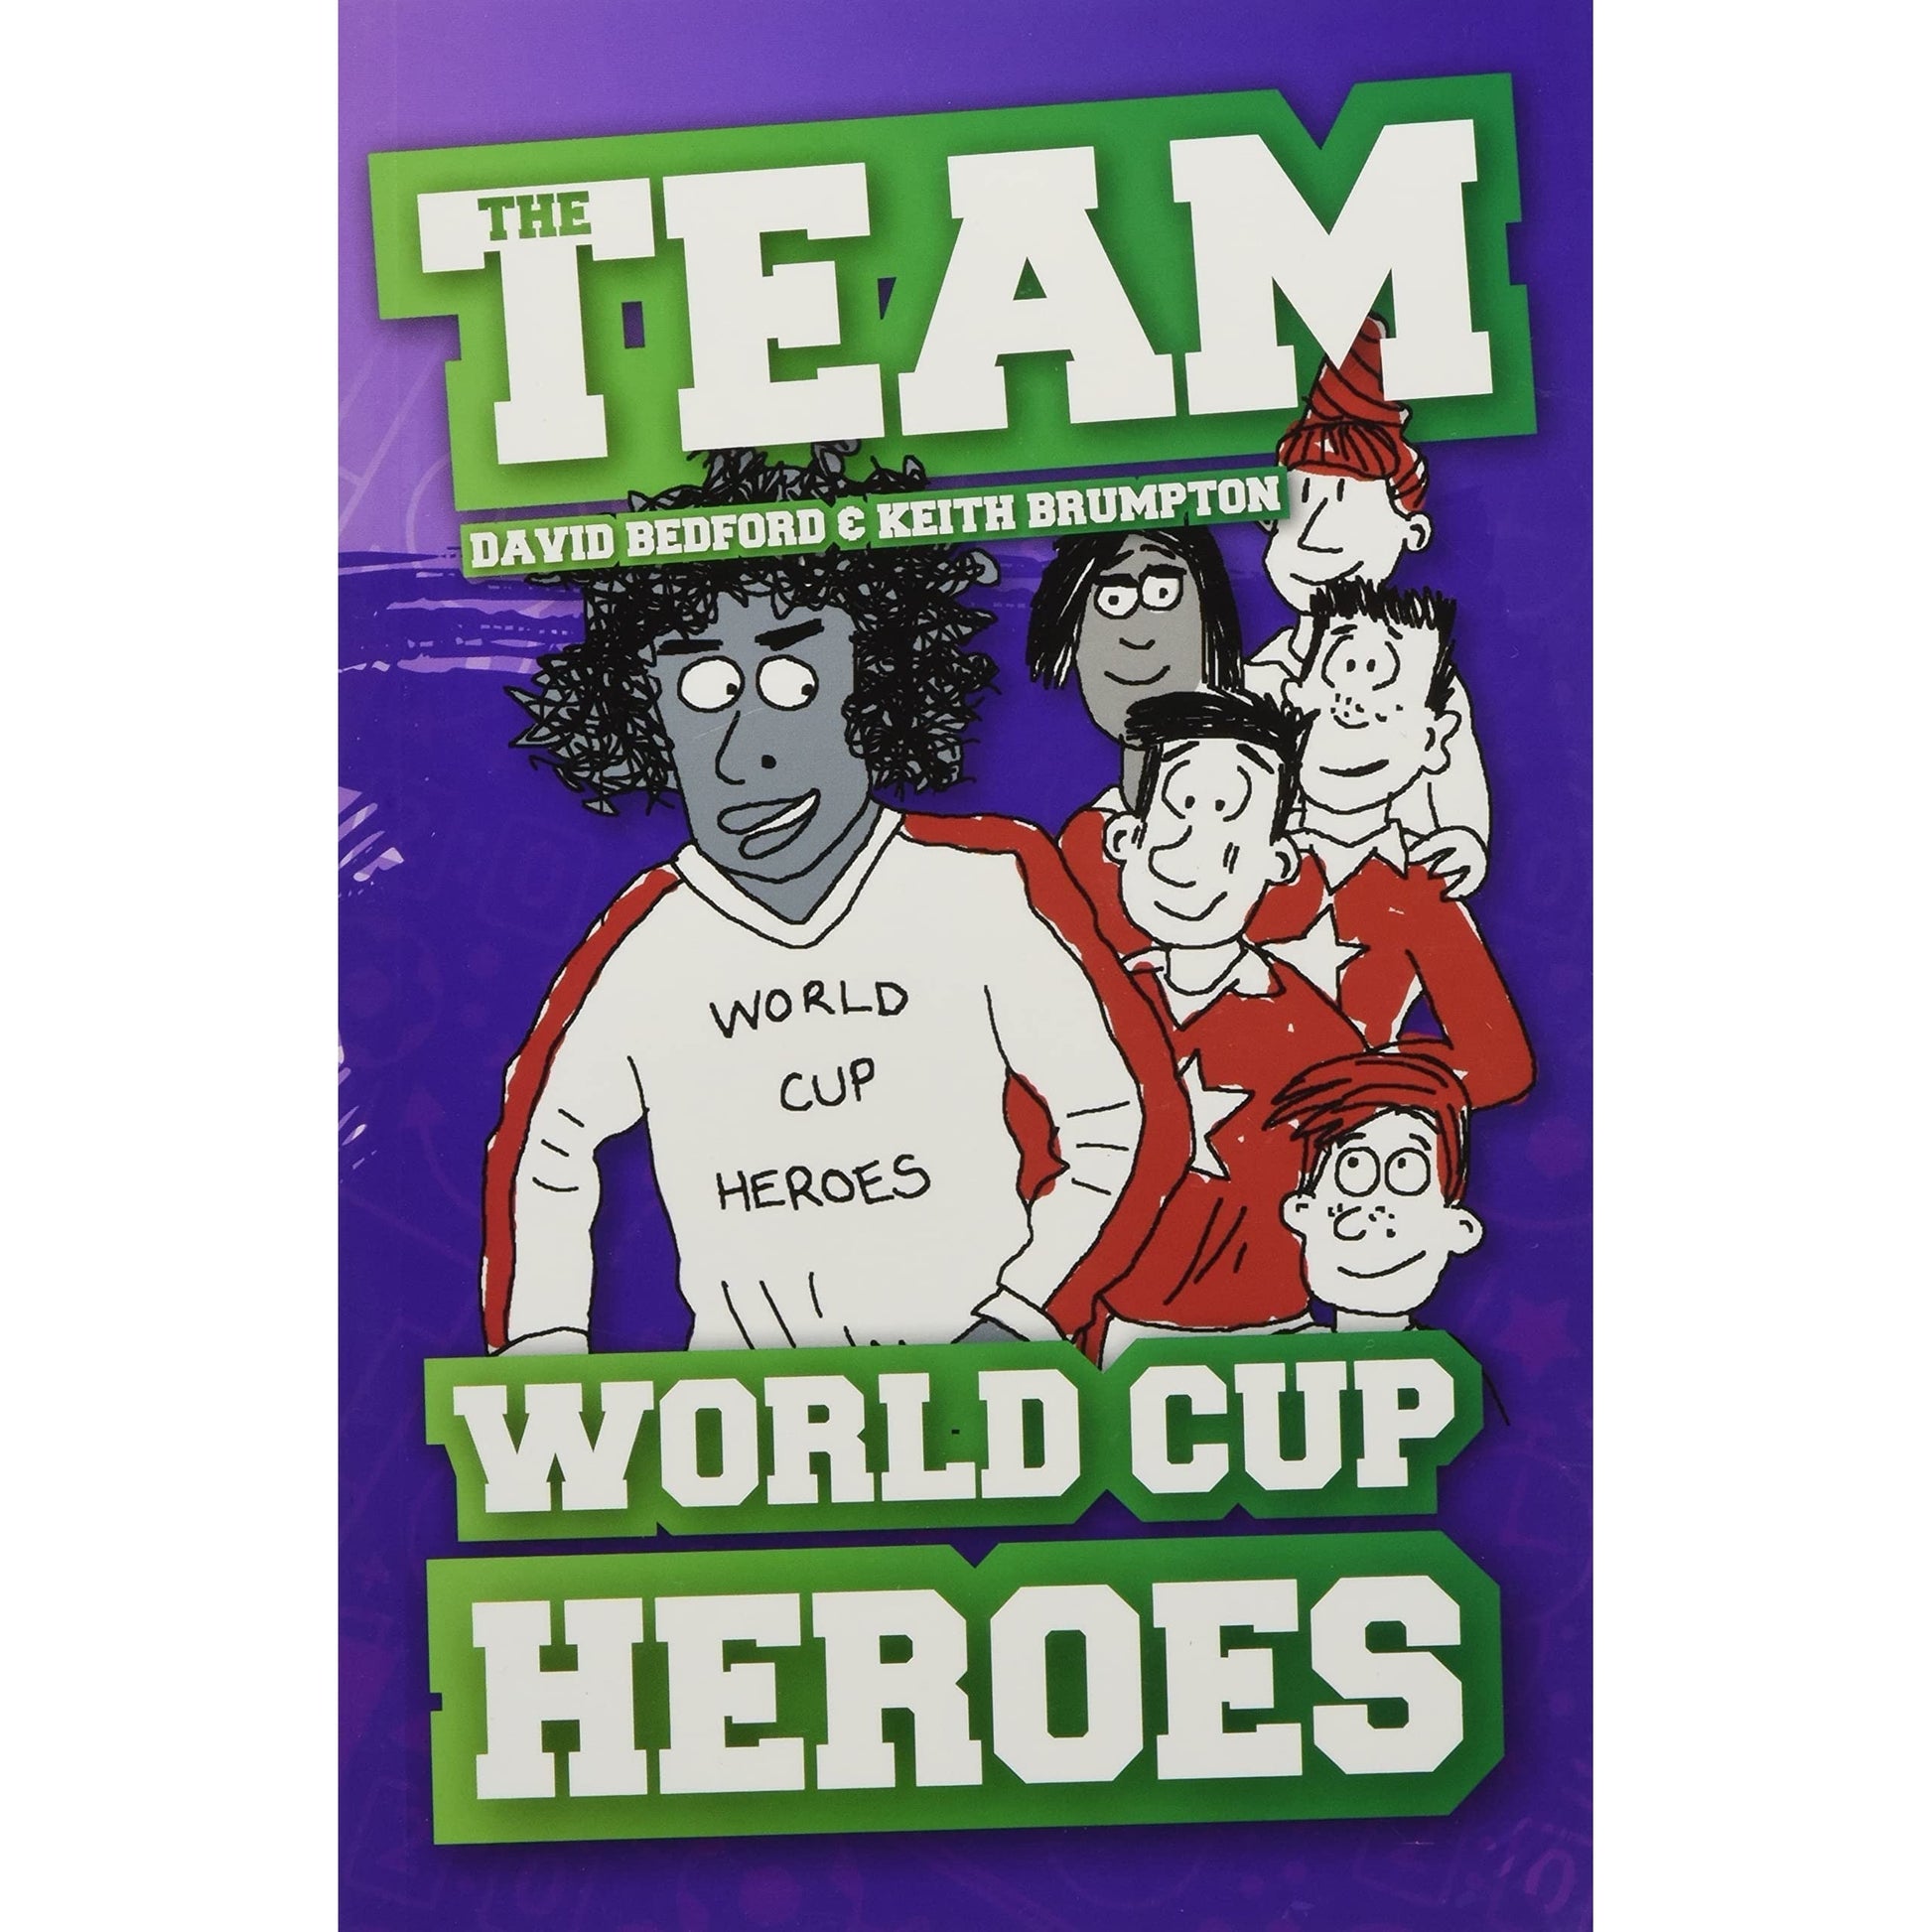 World Cup Heroes (The Team) - David Bedford